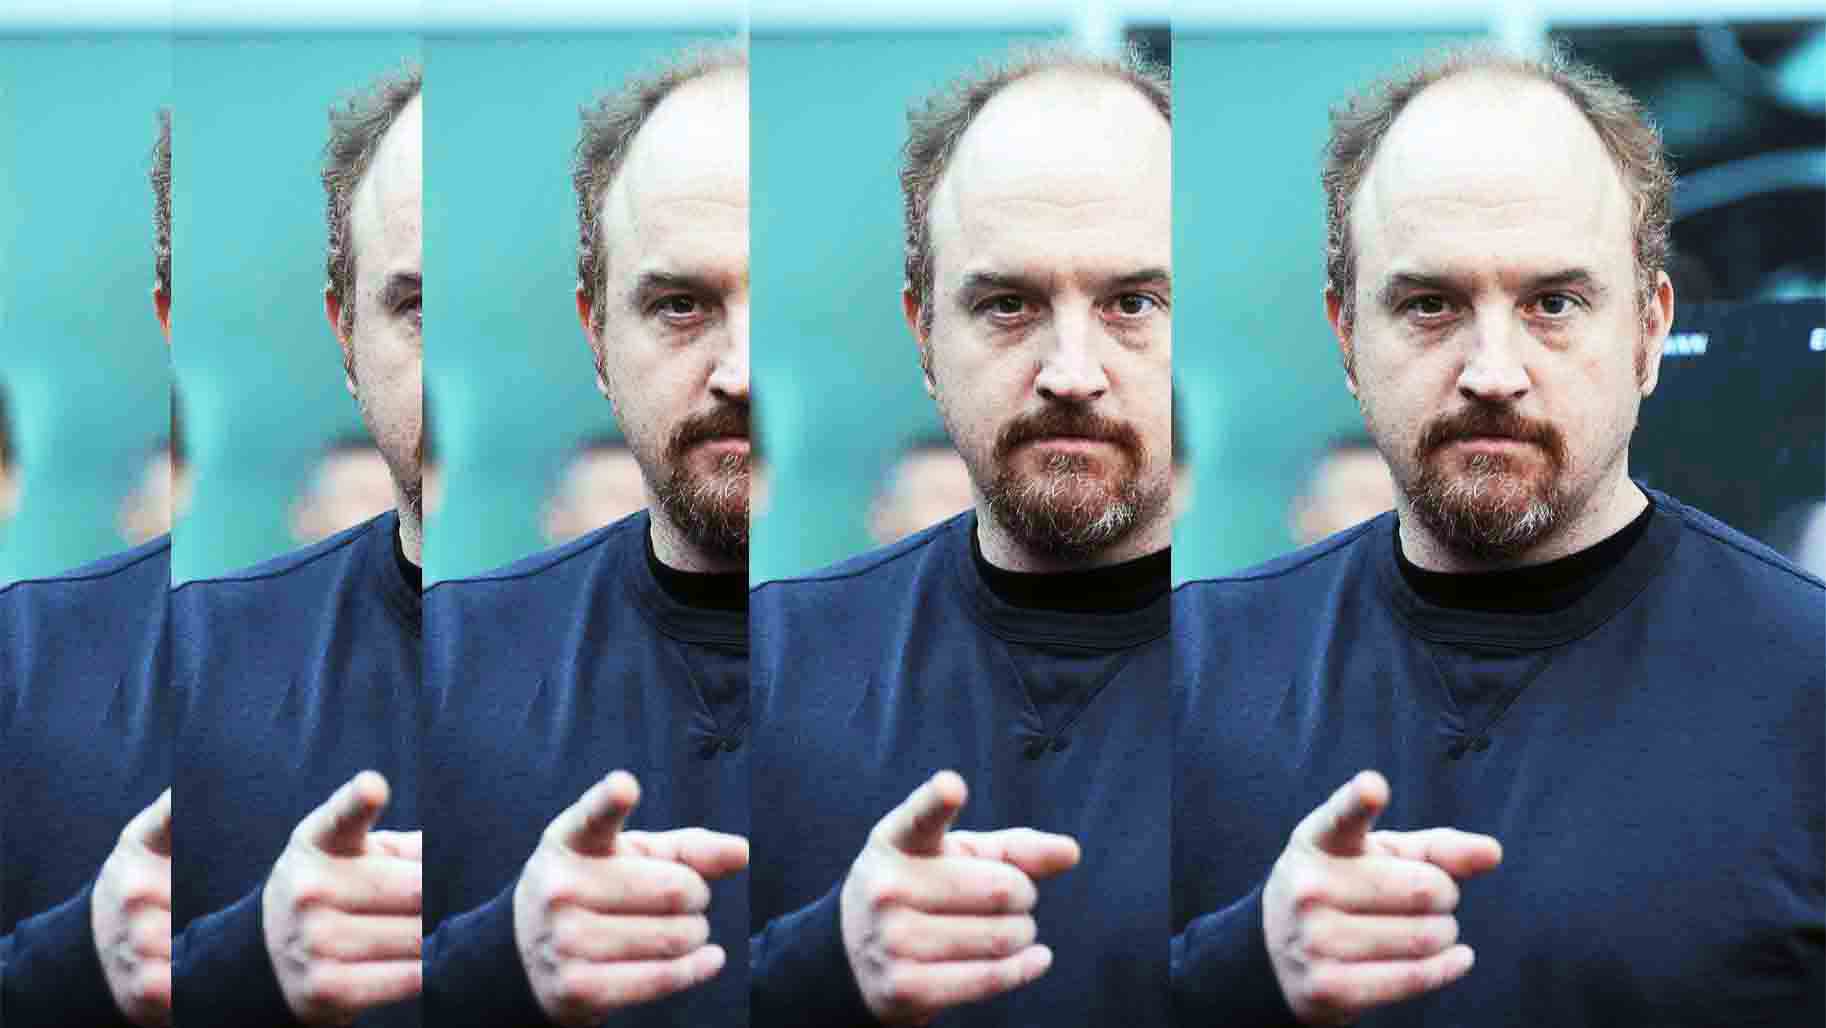 Louis CK and Philosophy: You Don't Get to Be Bored (Popular Culture and  Philosophy, 99)